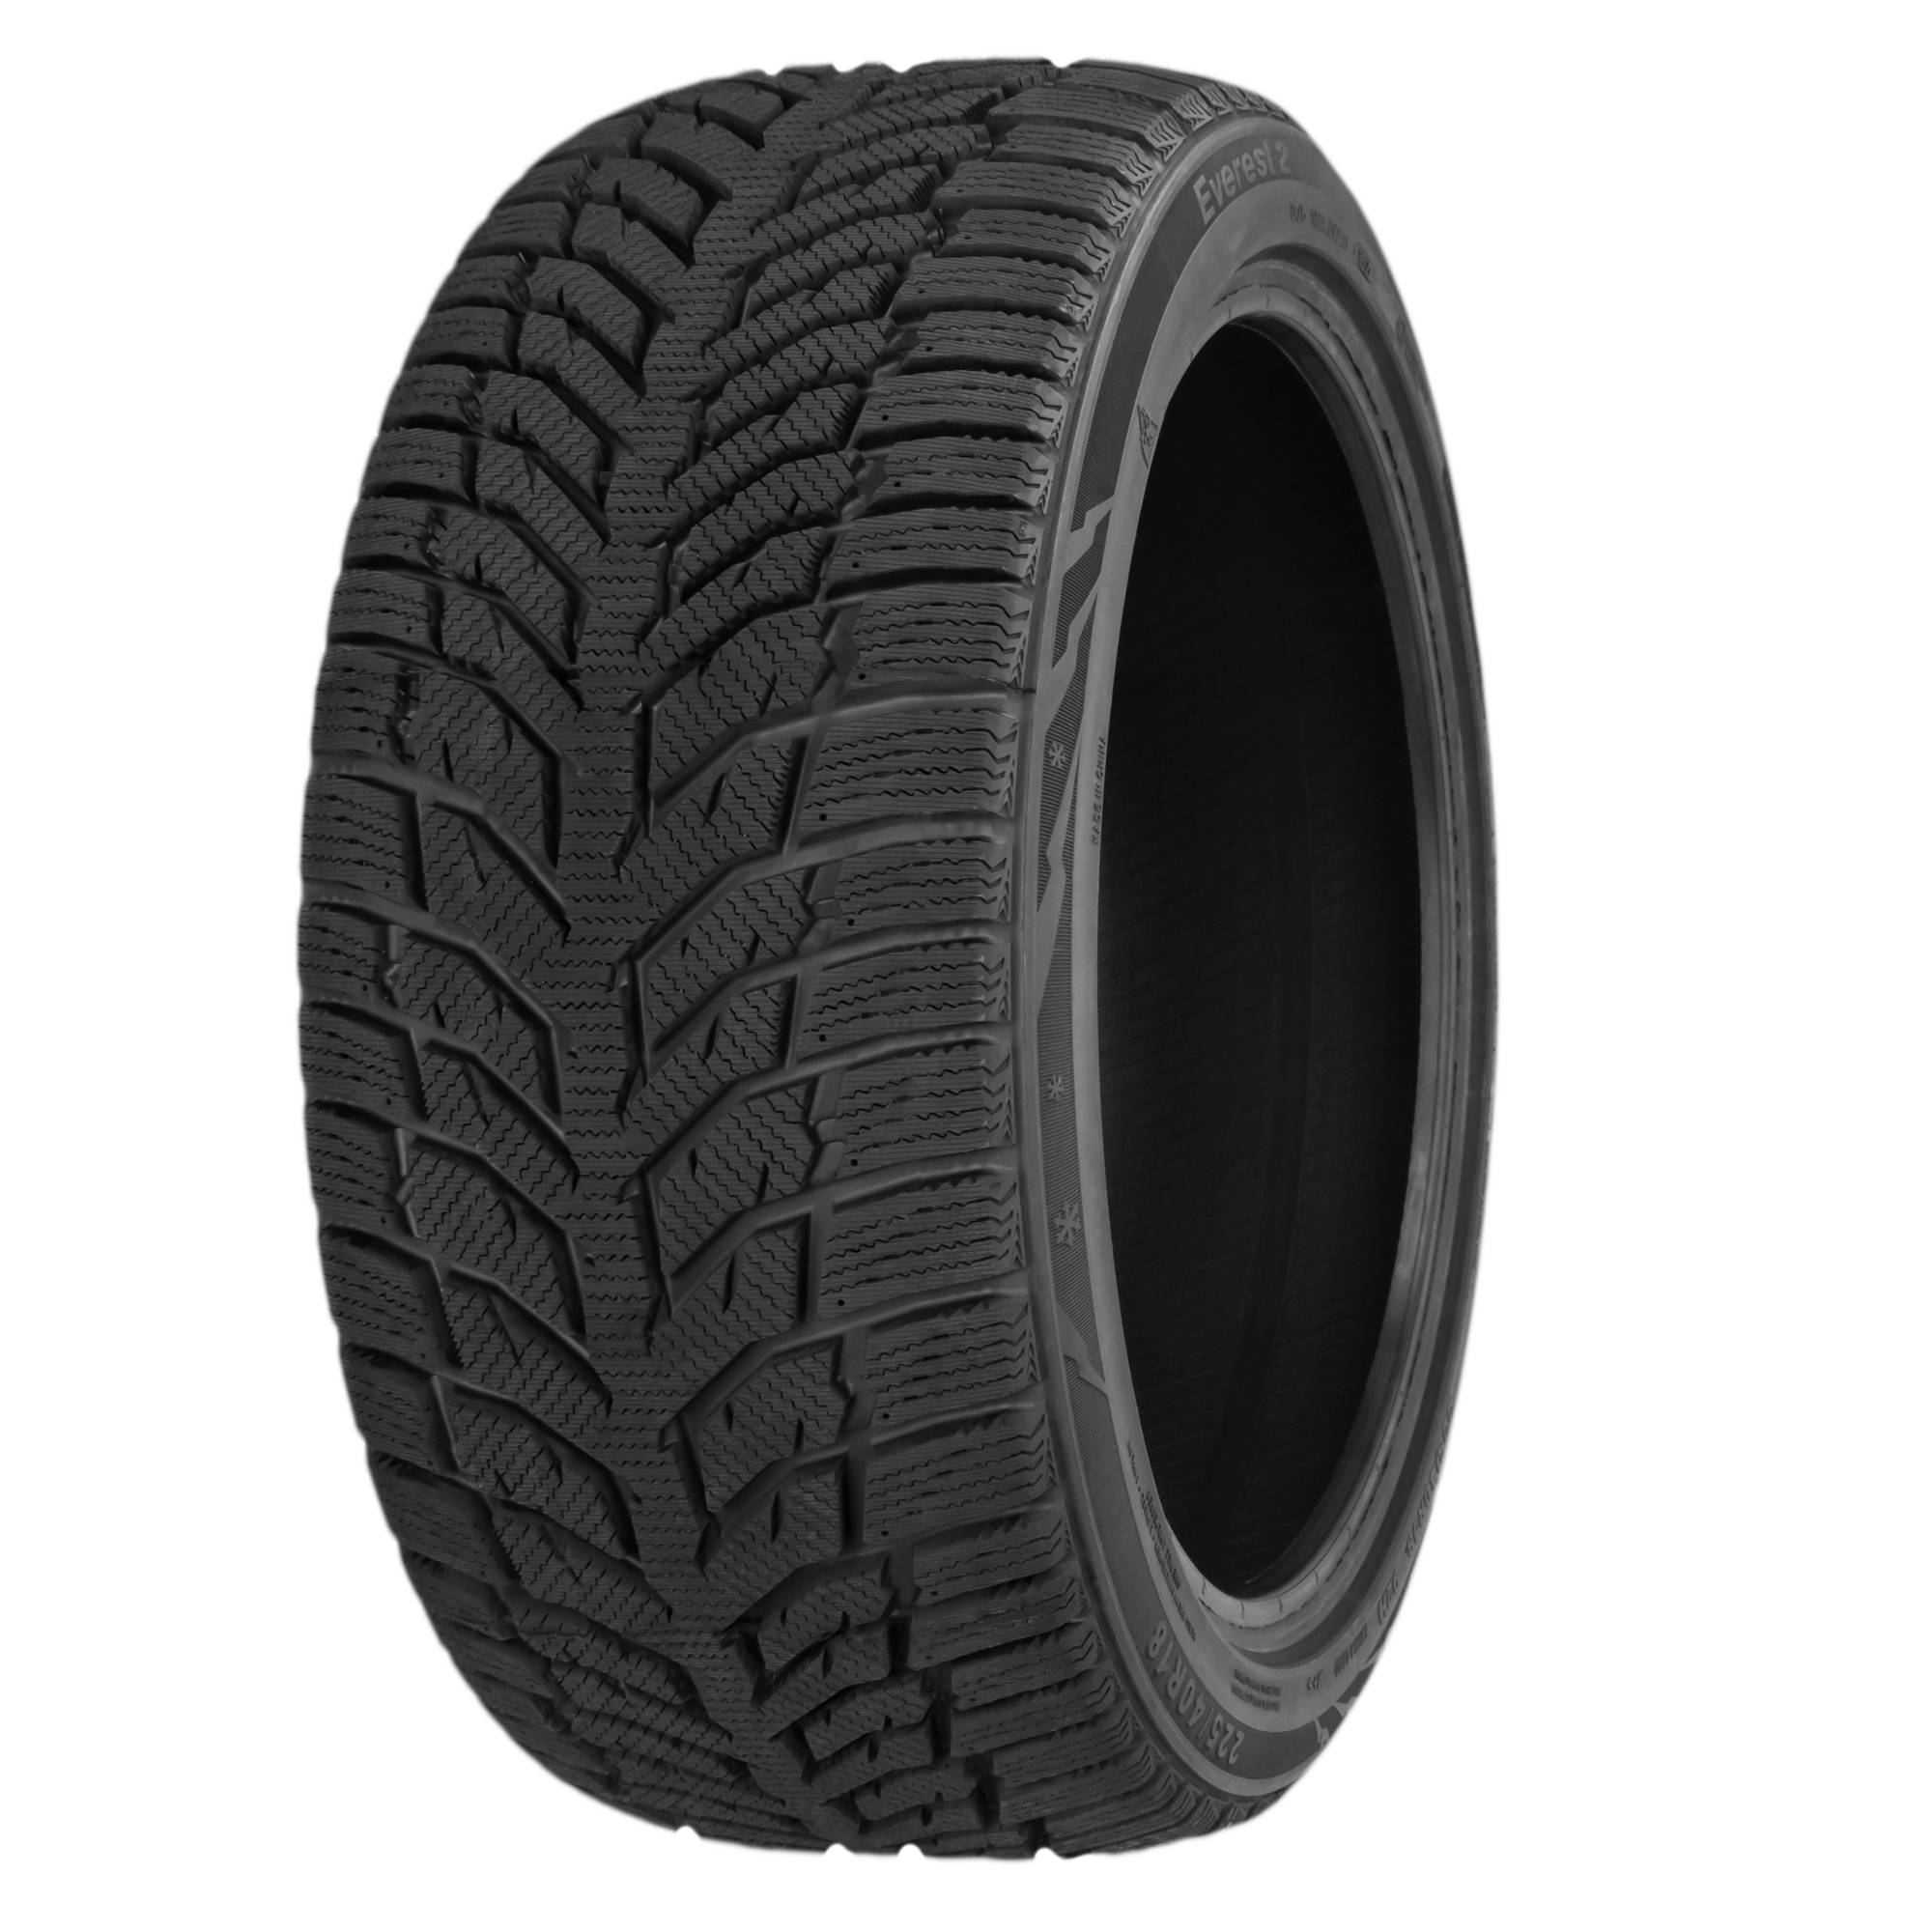 EAN 4250084605561, SYRON EVEREST 2 M+S 3PMSF, 185/60 R14 82 T